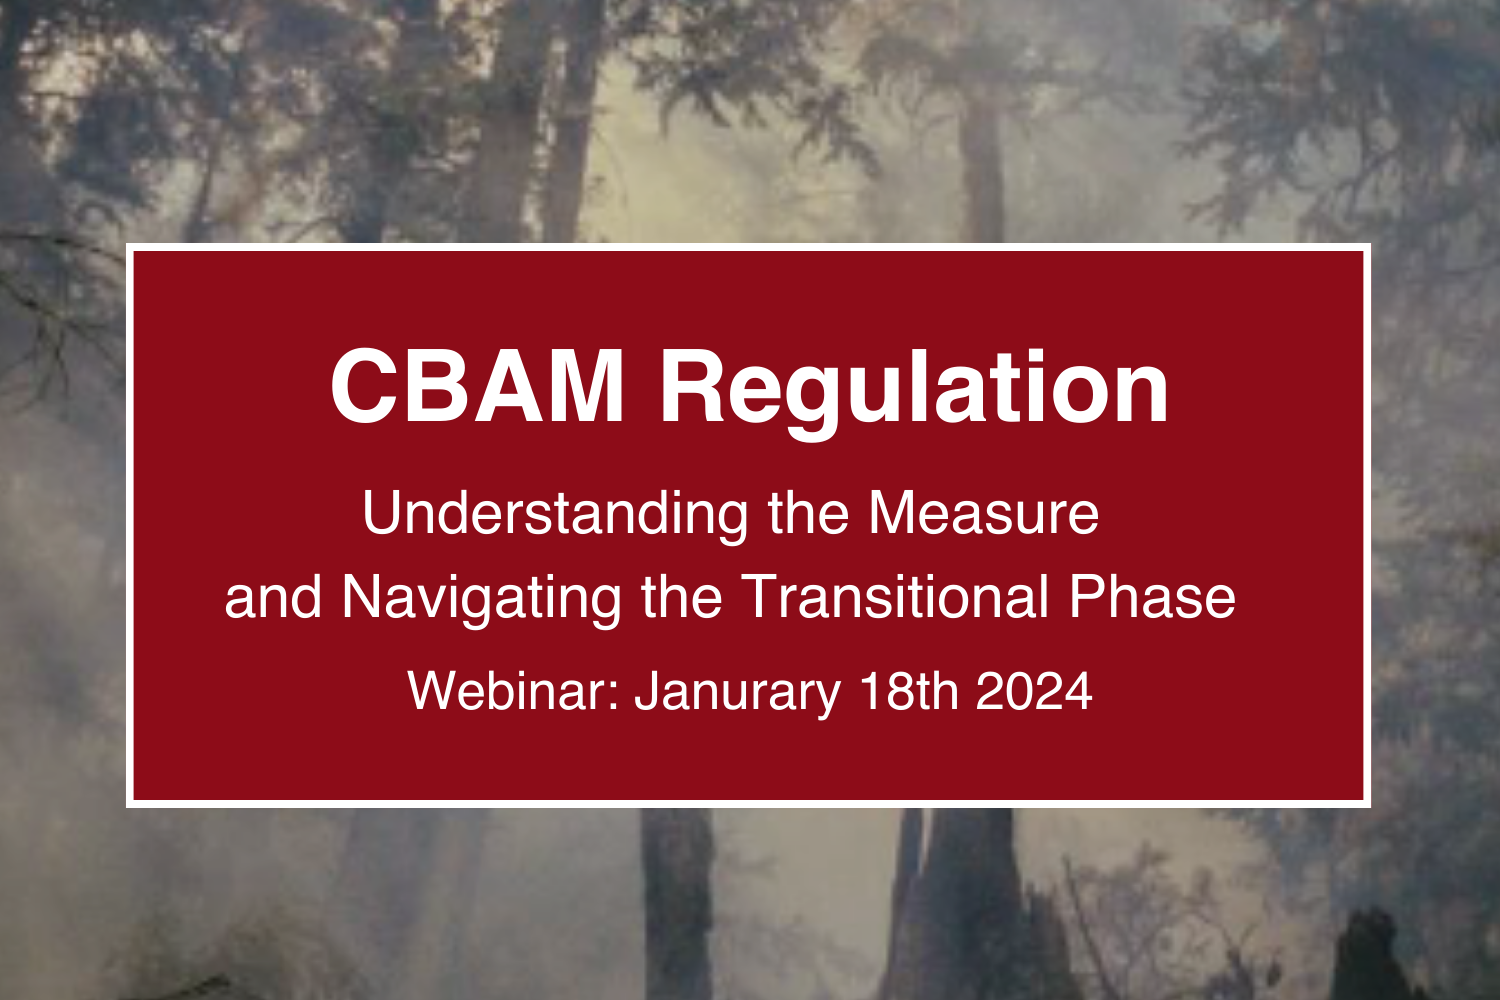 Webinar: January 18, 2024: CBAM Regulation – Understanding the Measure and Navigating the Transitional Phase